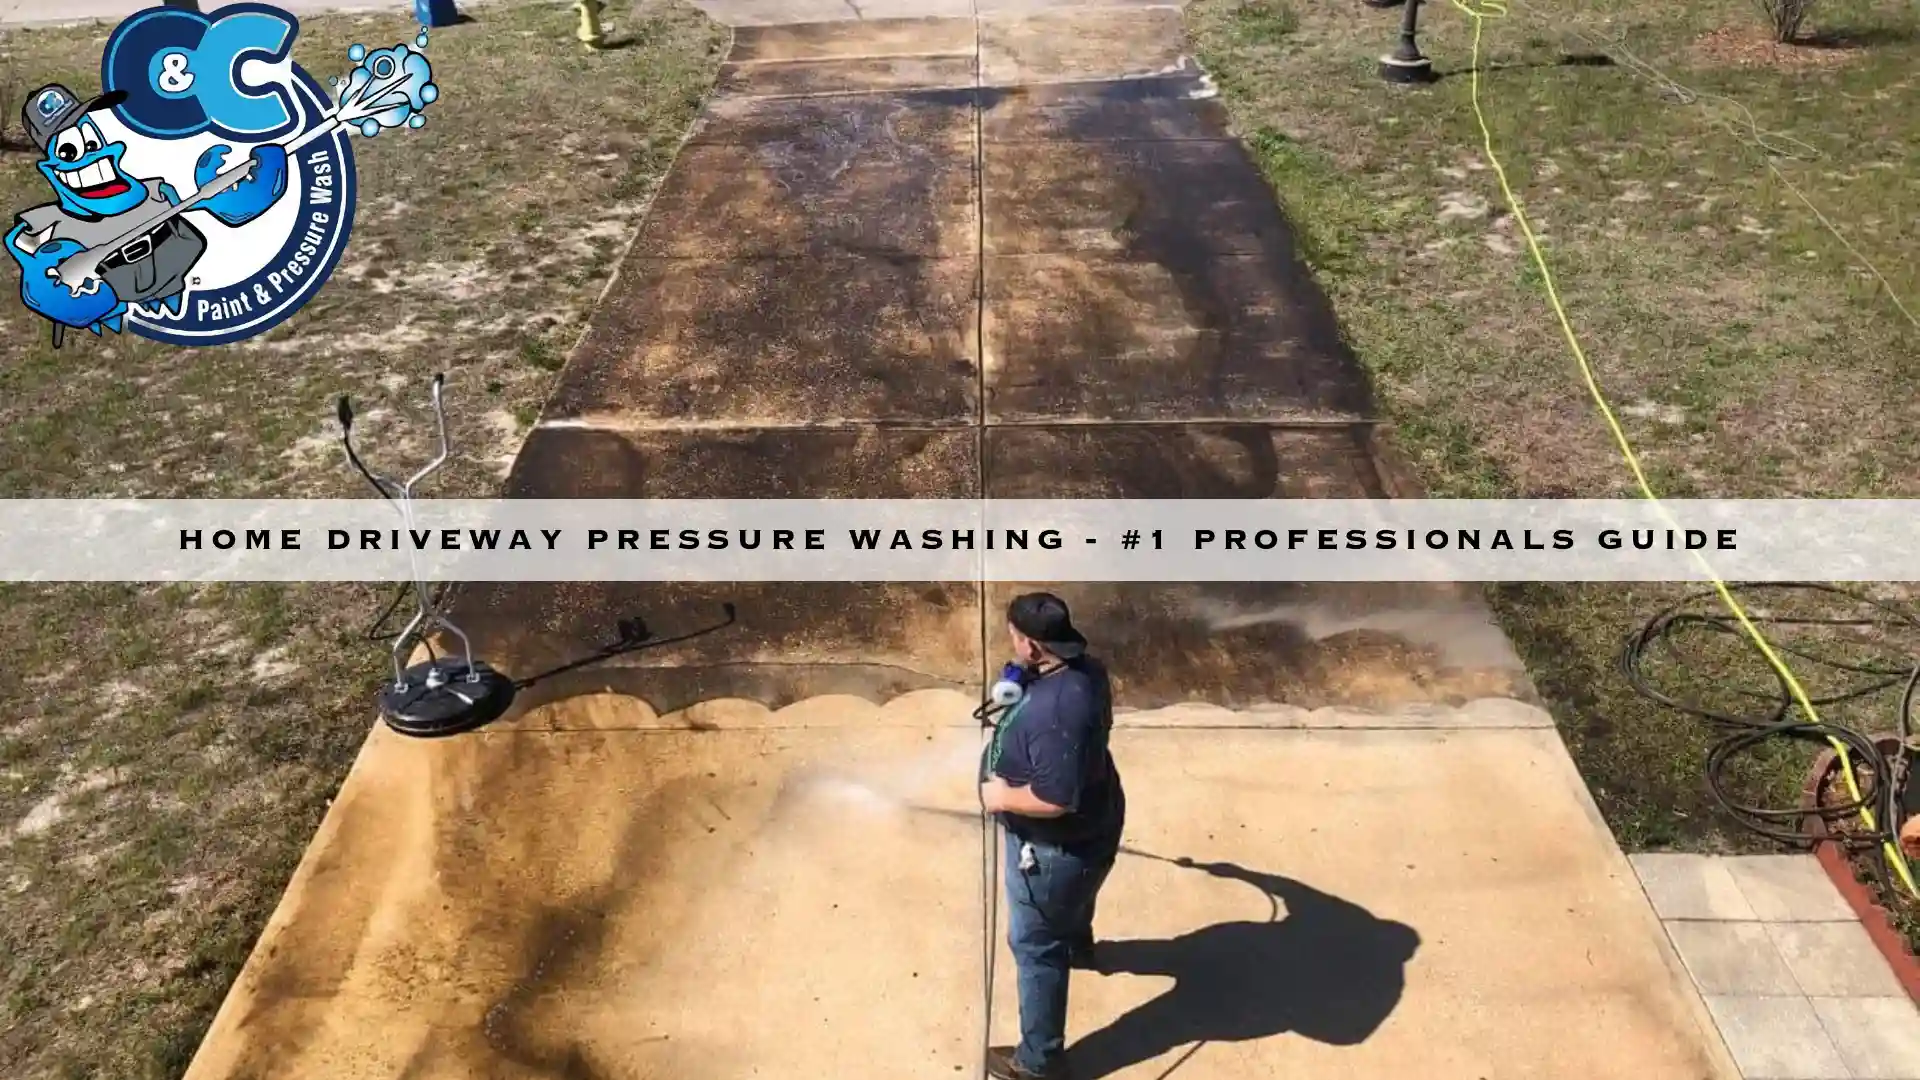 Home Driveway Pressure Washing - #1 Professionals Guide